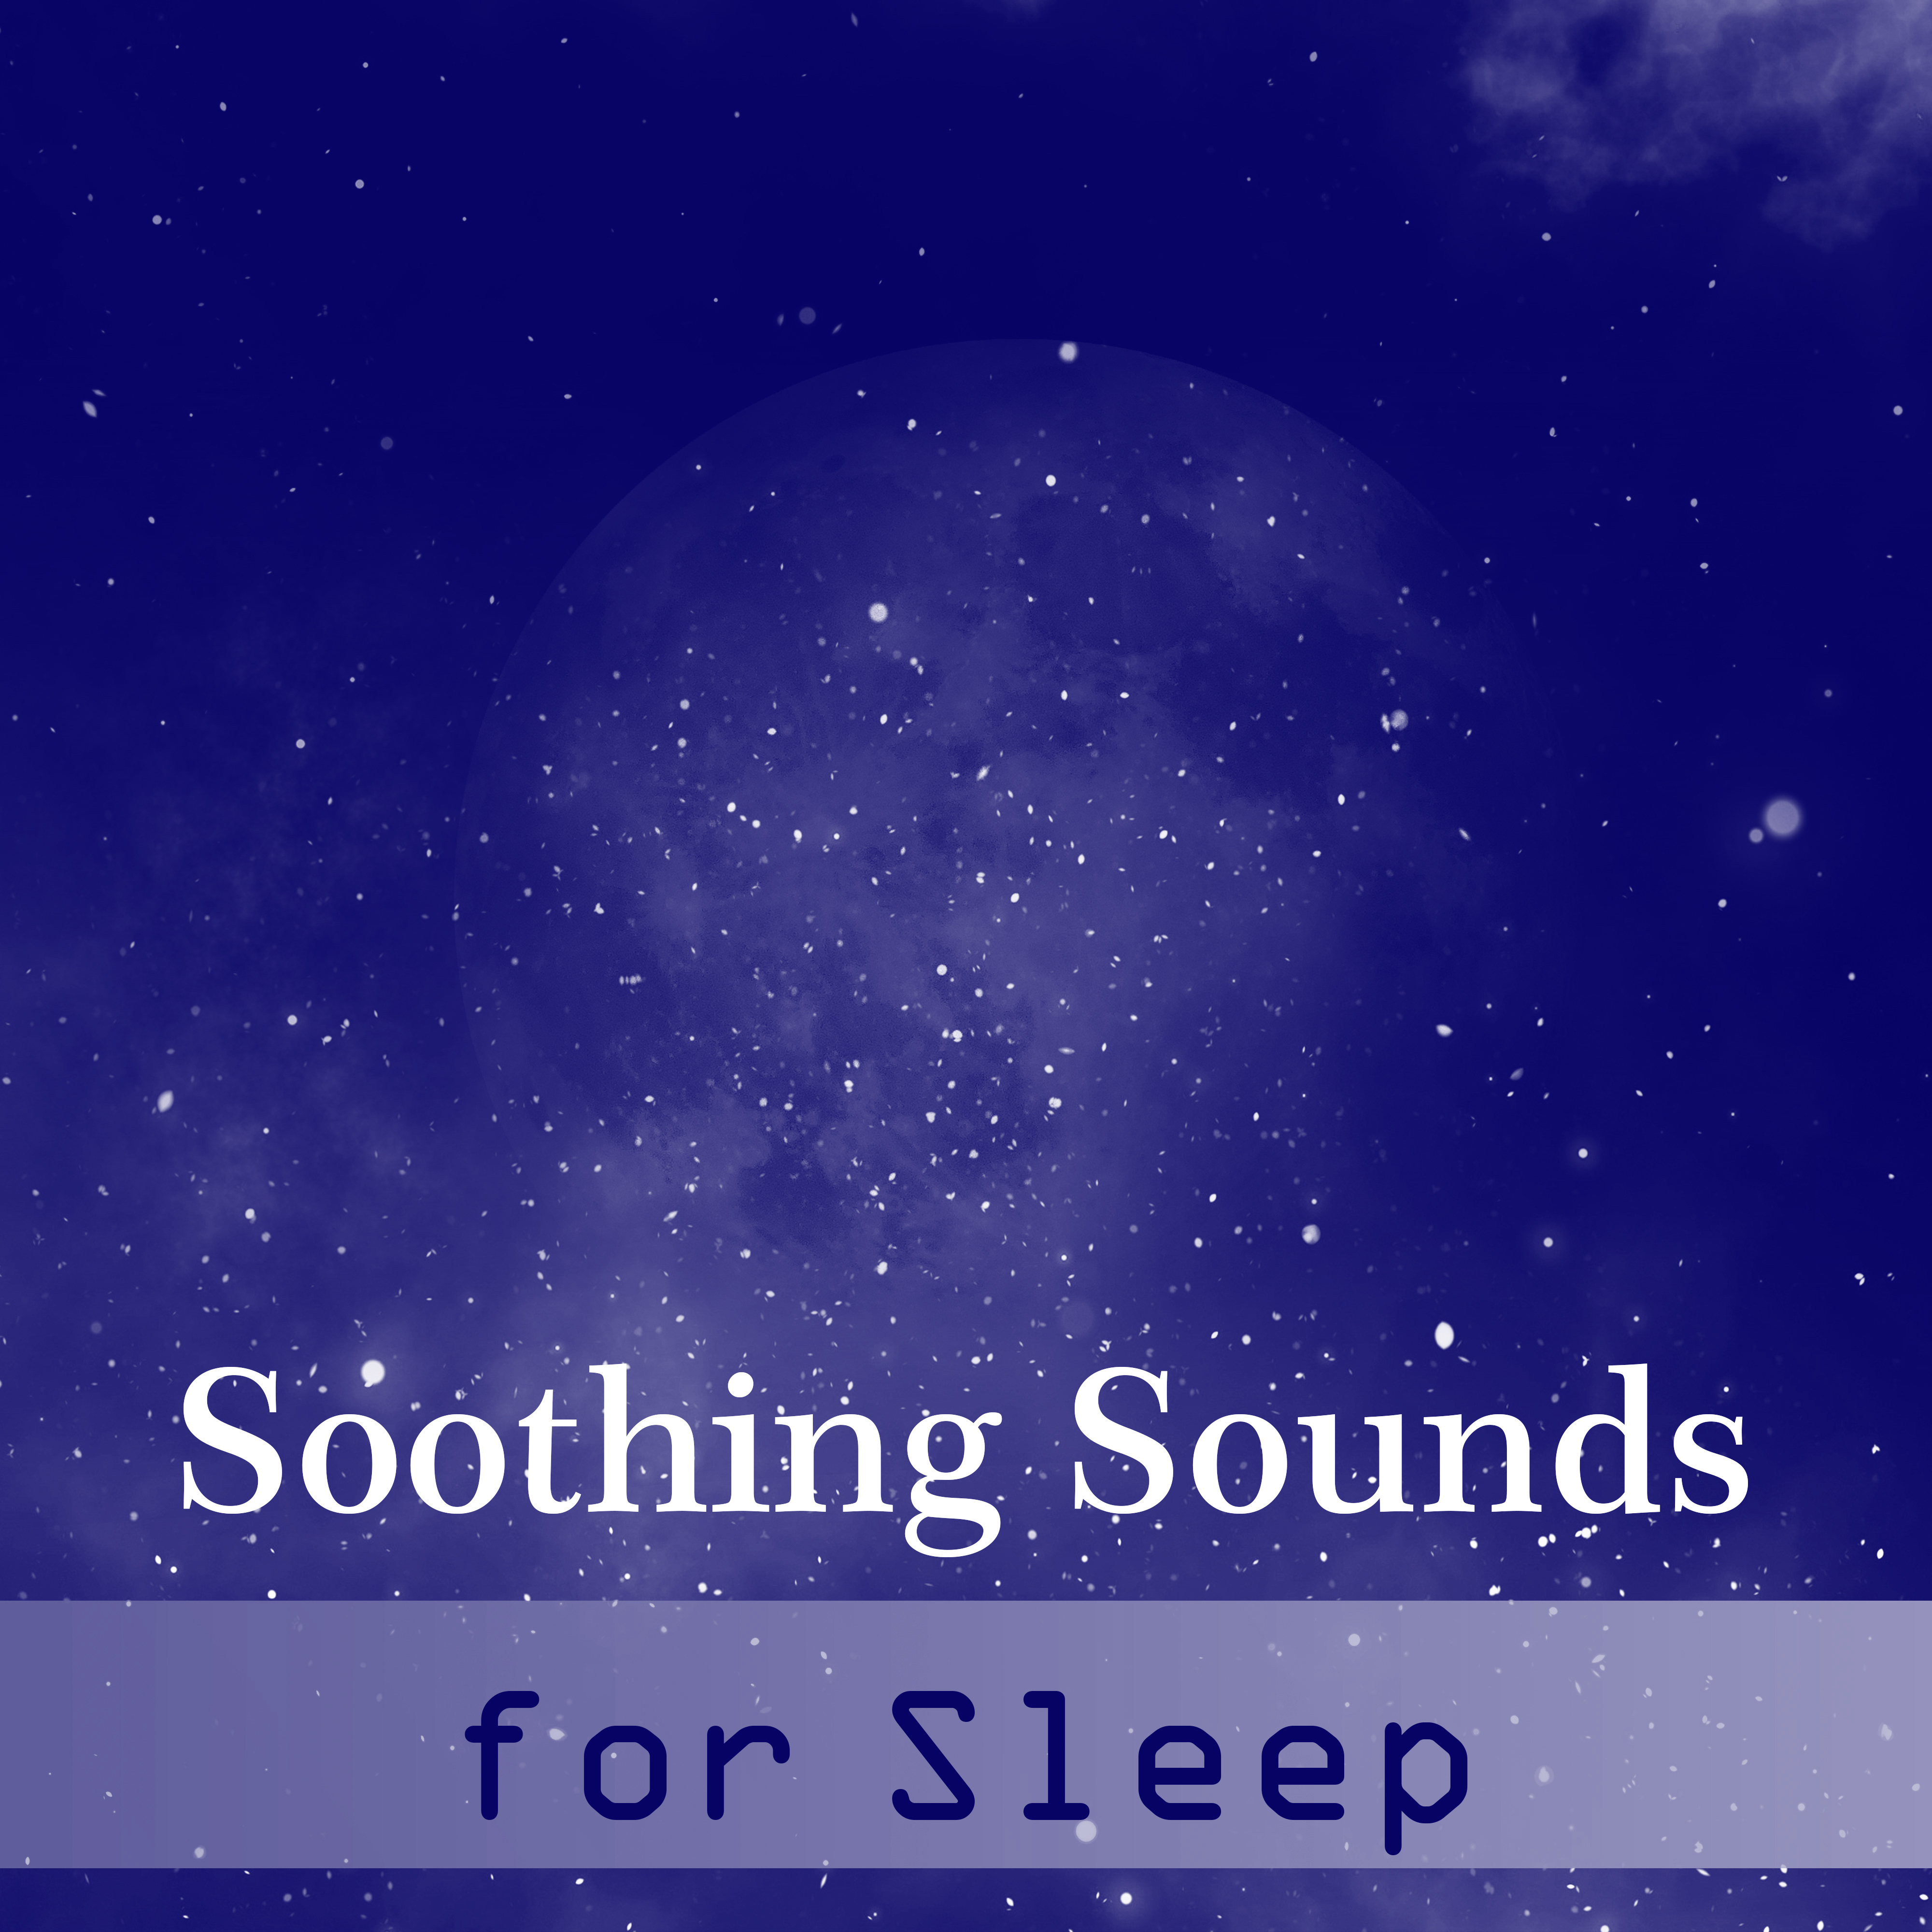 Soothing Sounds for Sleep  Healing Music at Goodnight, Pure Mind, Relaxing Dream, Gentle Lullaby, Deep Relief, Calm Nap